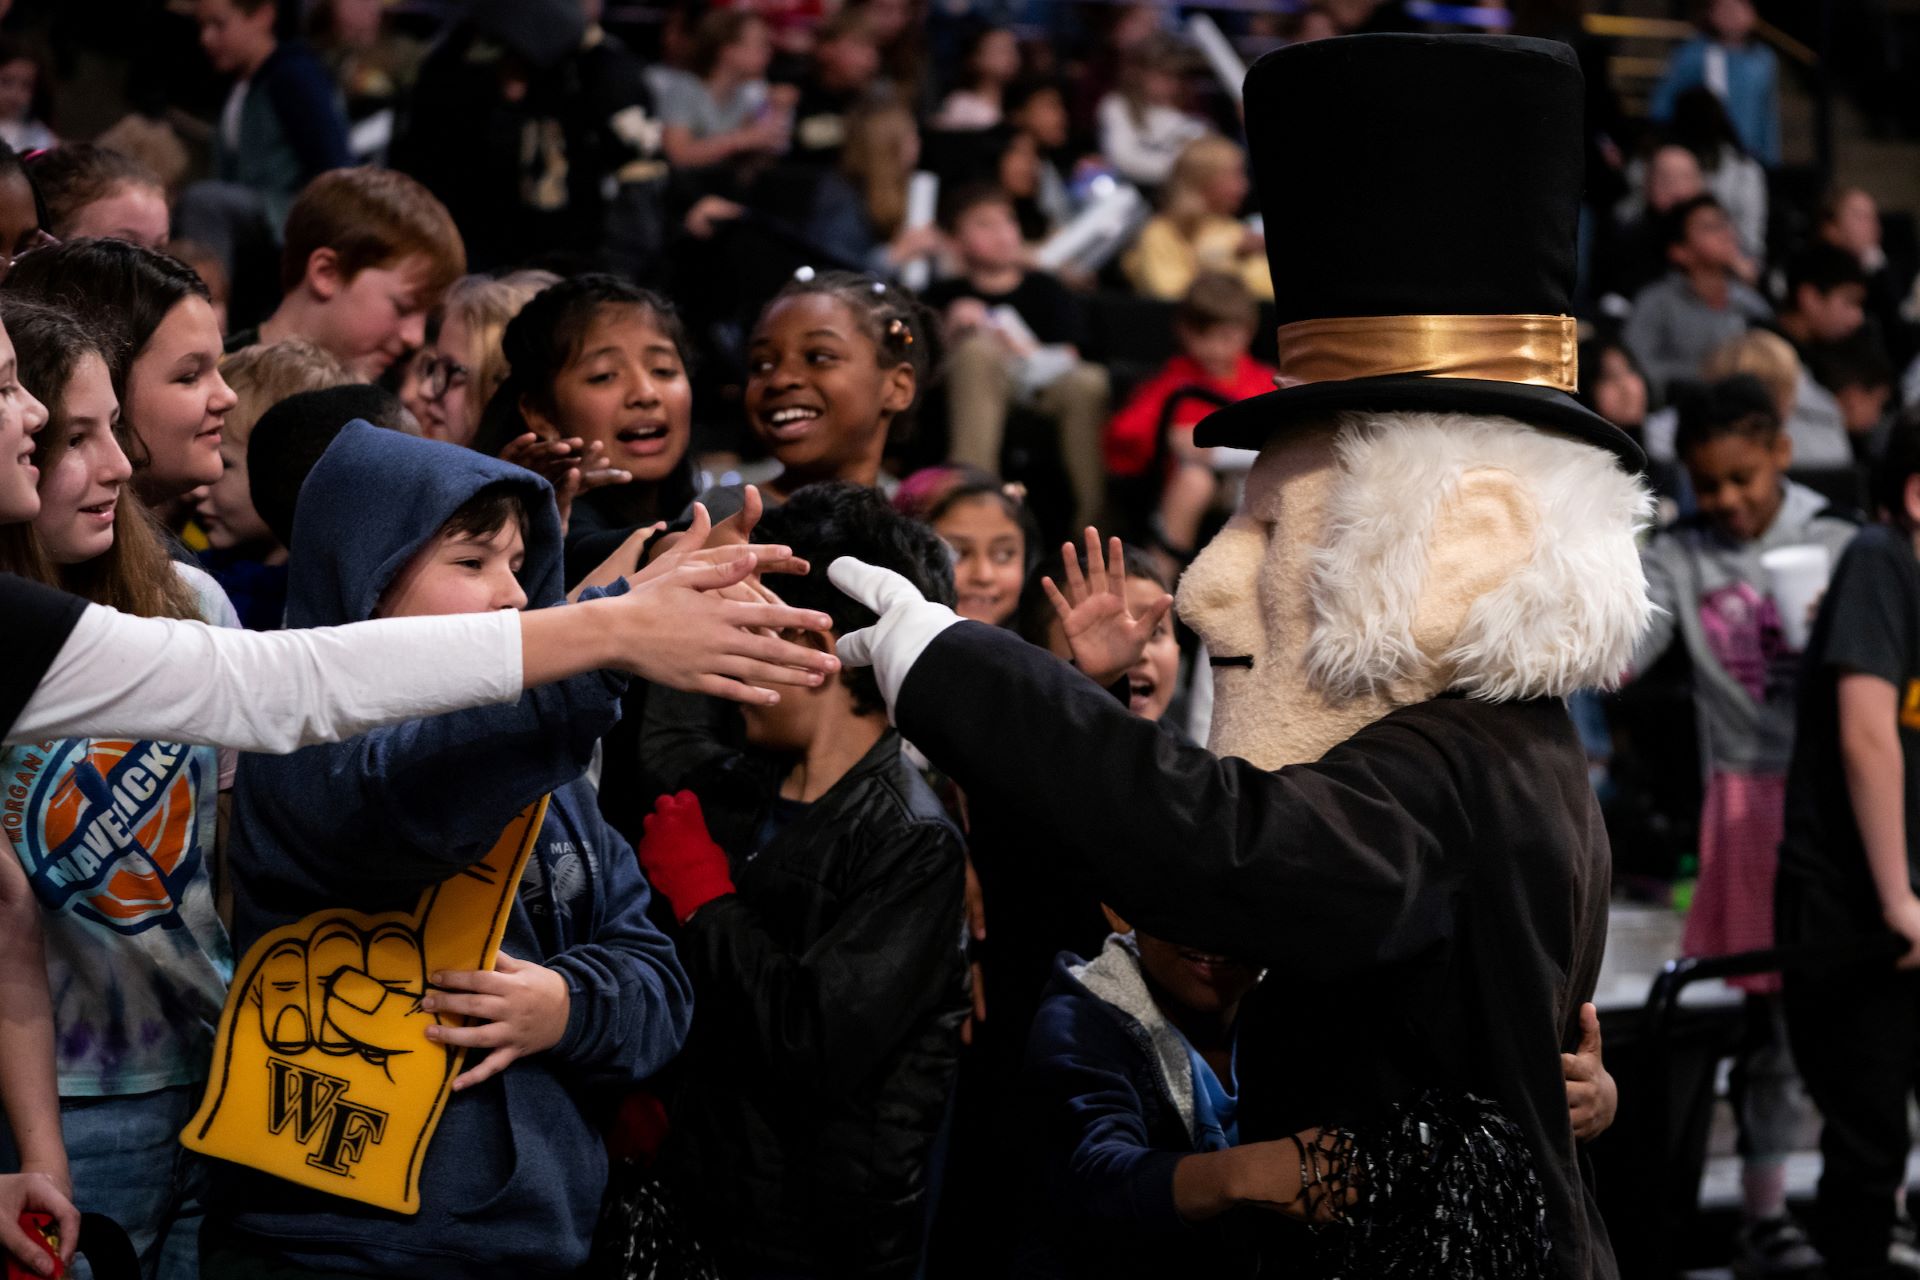 Demon Deacon interacting with fans